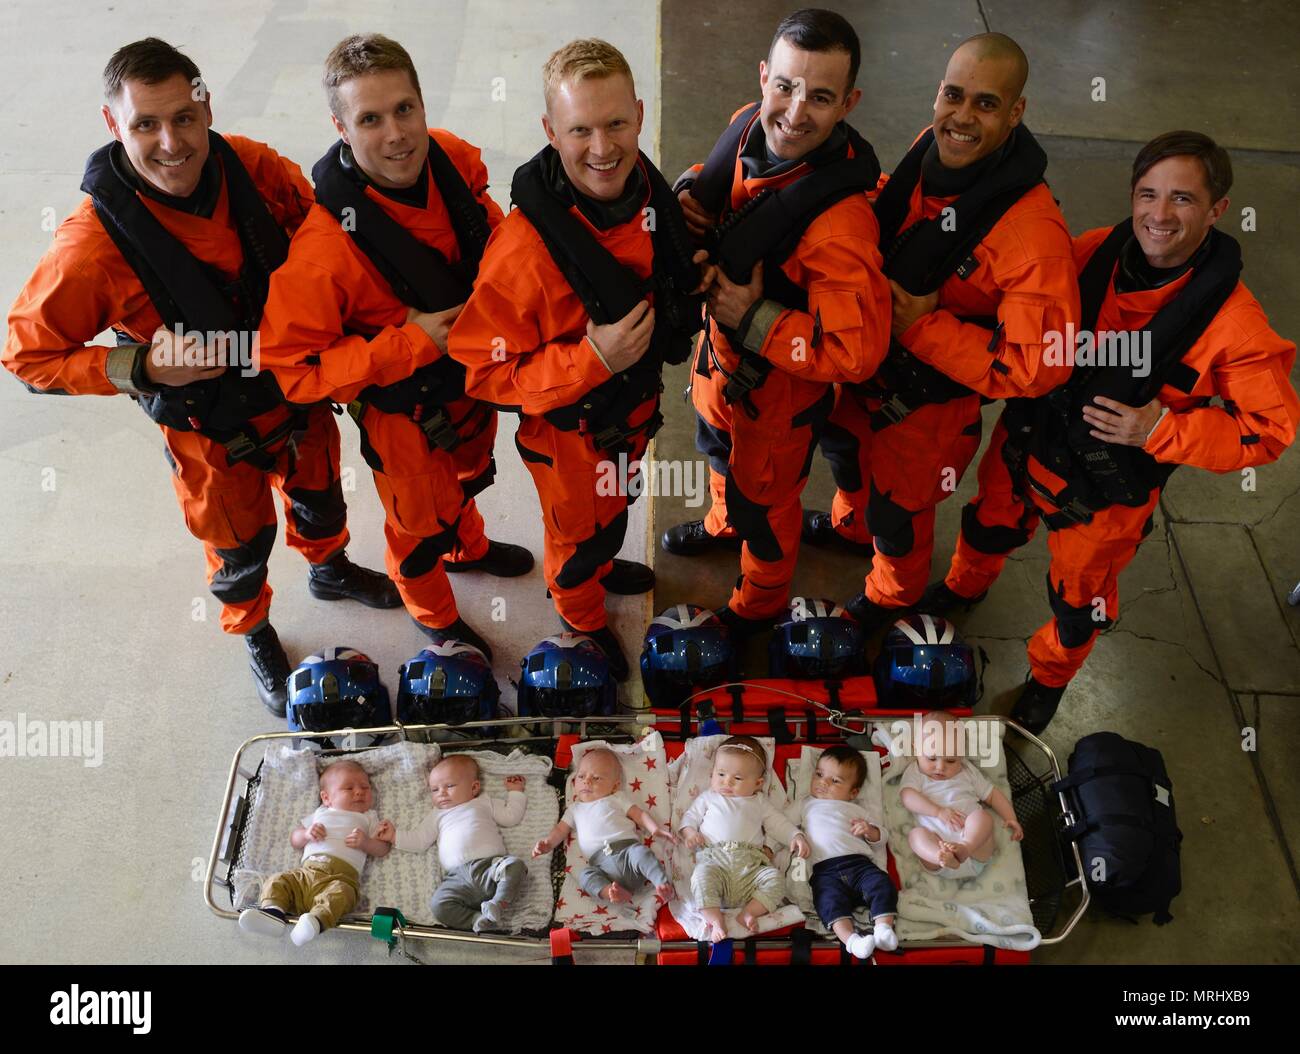 Coast Guard Sector Columbia River MH-60 Jayhawk helicopter pilots Lt. Patrick Wright, Ensign Dave Strojny, Lt. Cmdr. James Cooley, Lt. j.g. Jason Weeks, Lt. Kyle Murphy and Lt. Jonathan Ralston stand over their babies in the Sector Columbia River hangar in Warrrenton, Ore., June 13, 2017.    Each of the pilots has welcomed a new baby into their family within the last 5 months.    U.S. Coast Guard photo by Petty Officer 1st Class Levi Read. Stock Photo